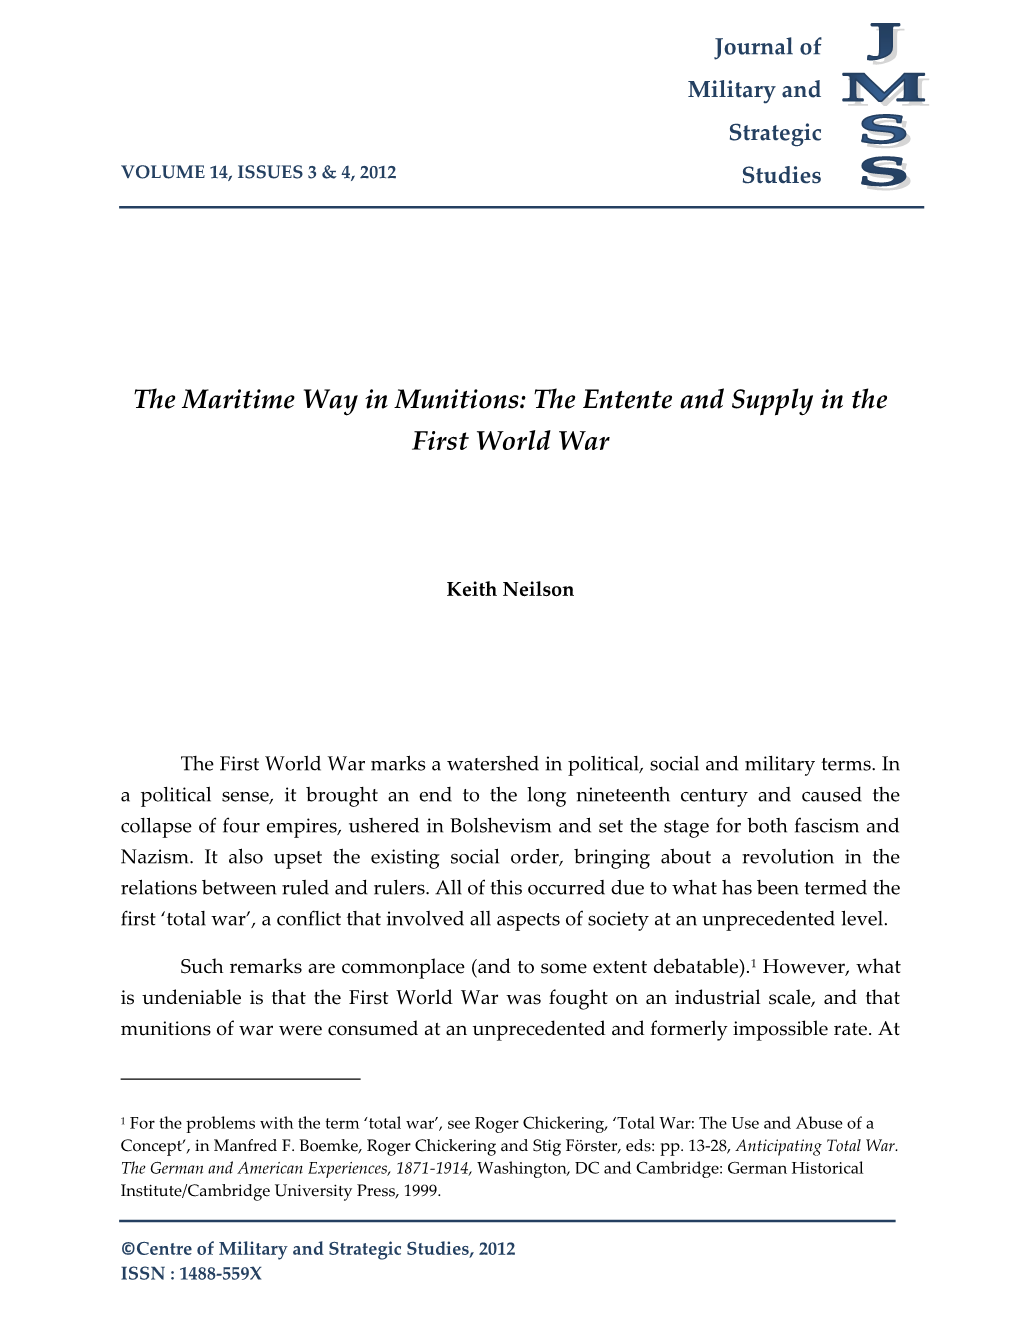 The Maritime Way in Munitions: the Entente and Supply in the First World War